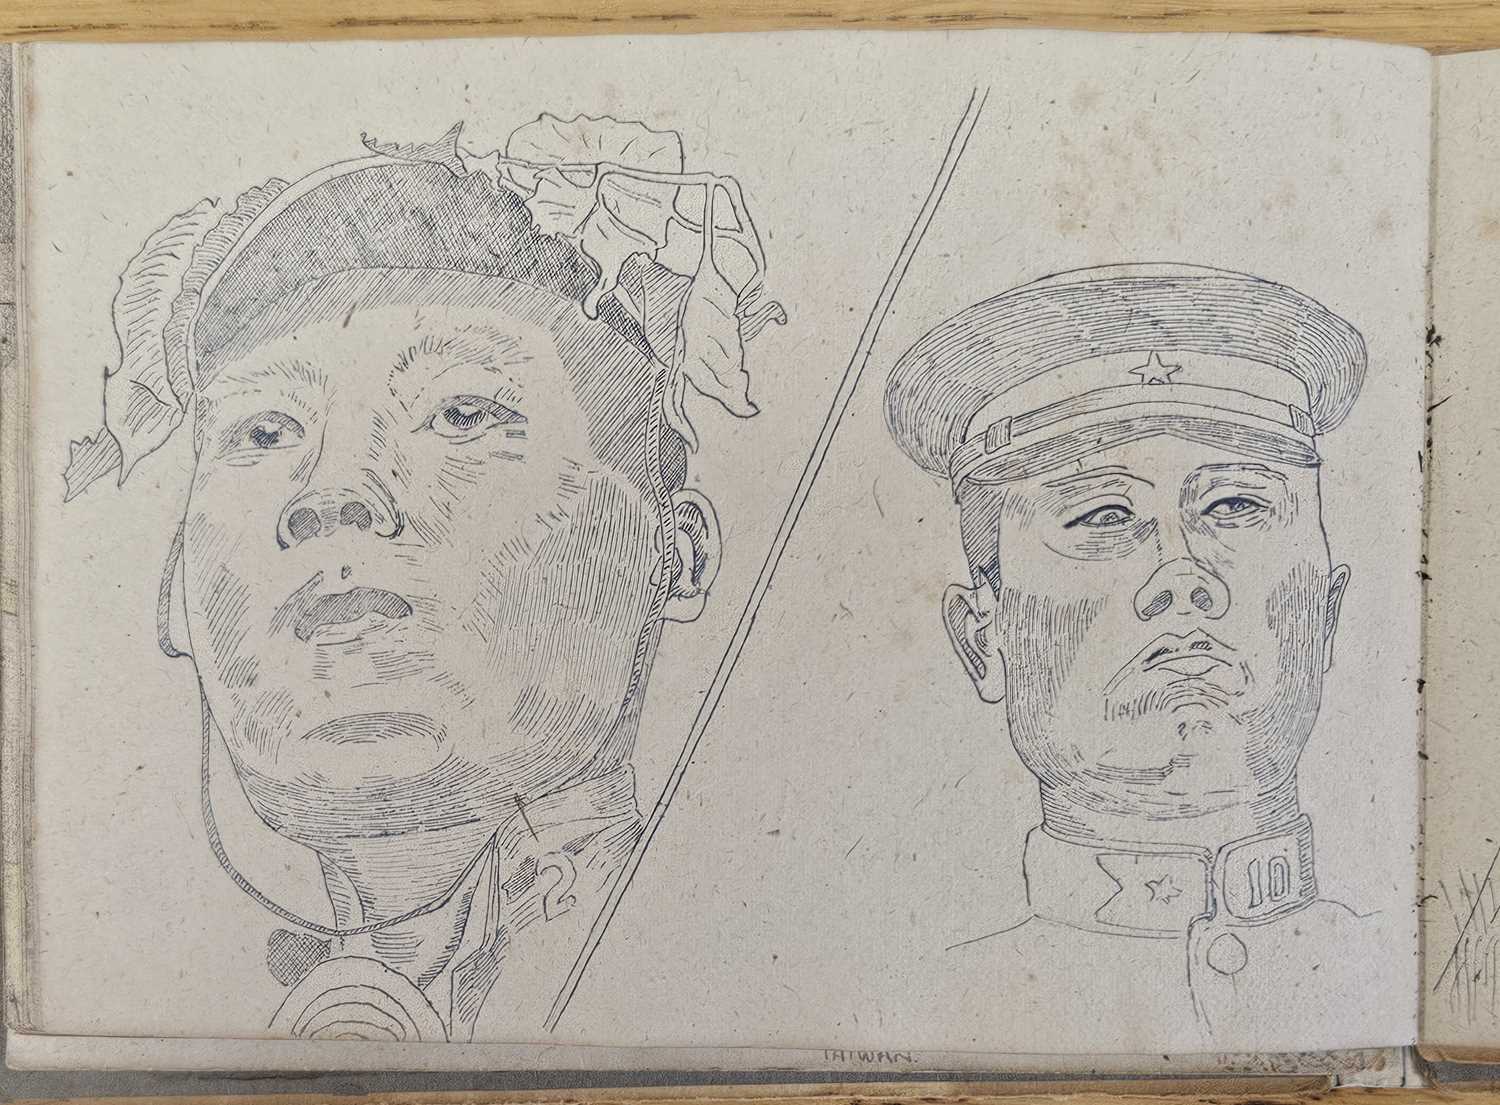 Rare Second World War sketchbook by POW 2nd/Lt Arkless Lockey - Image 34 of 35